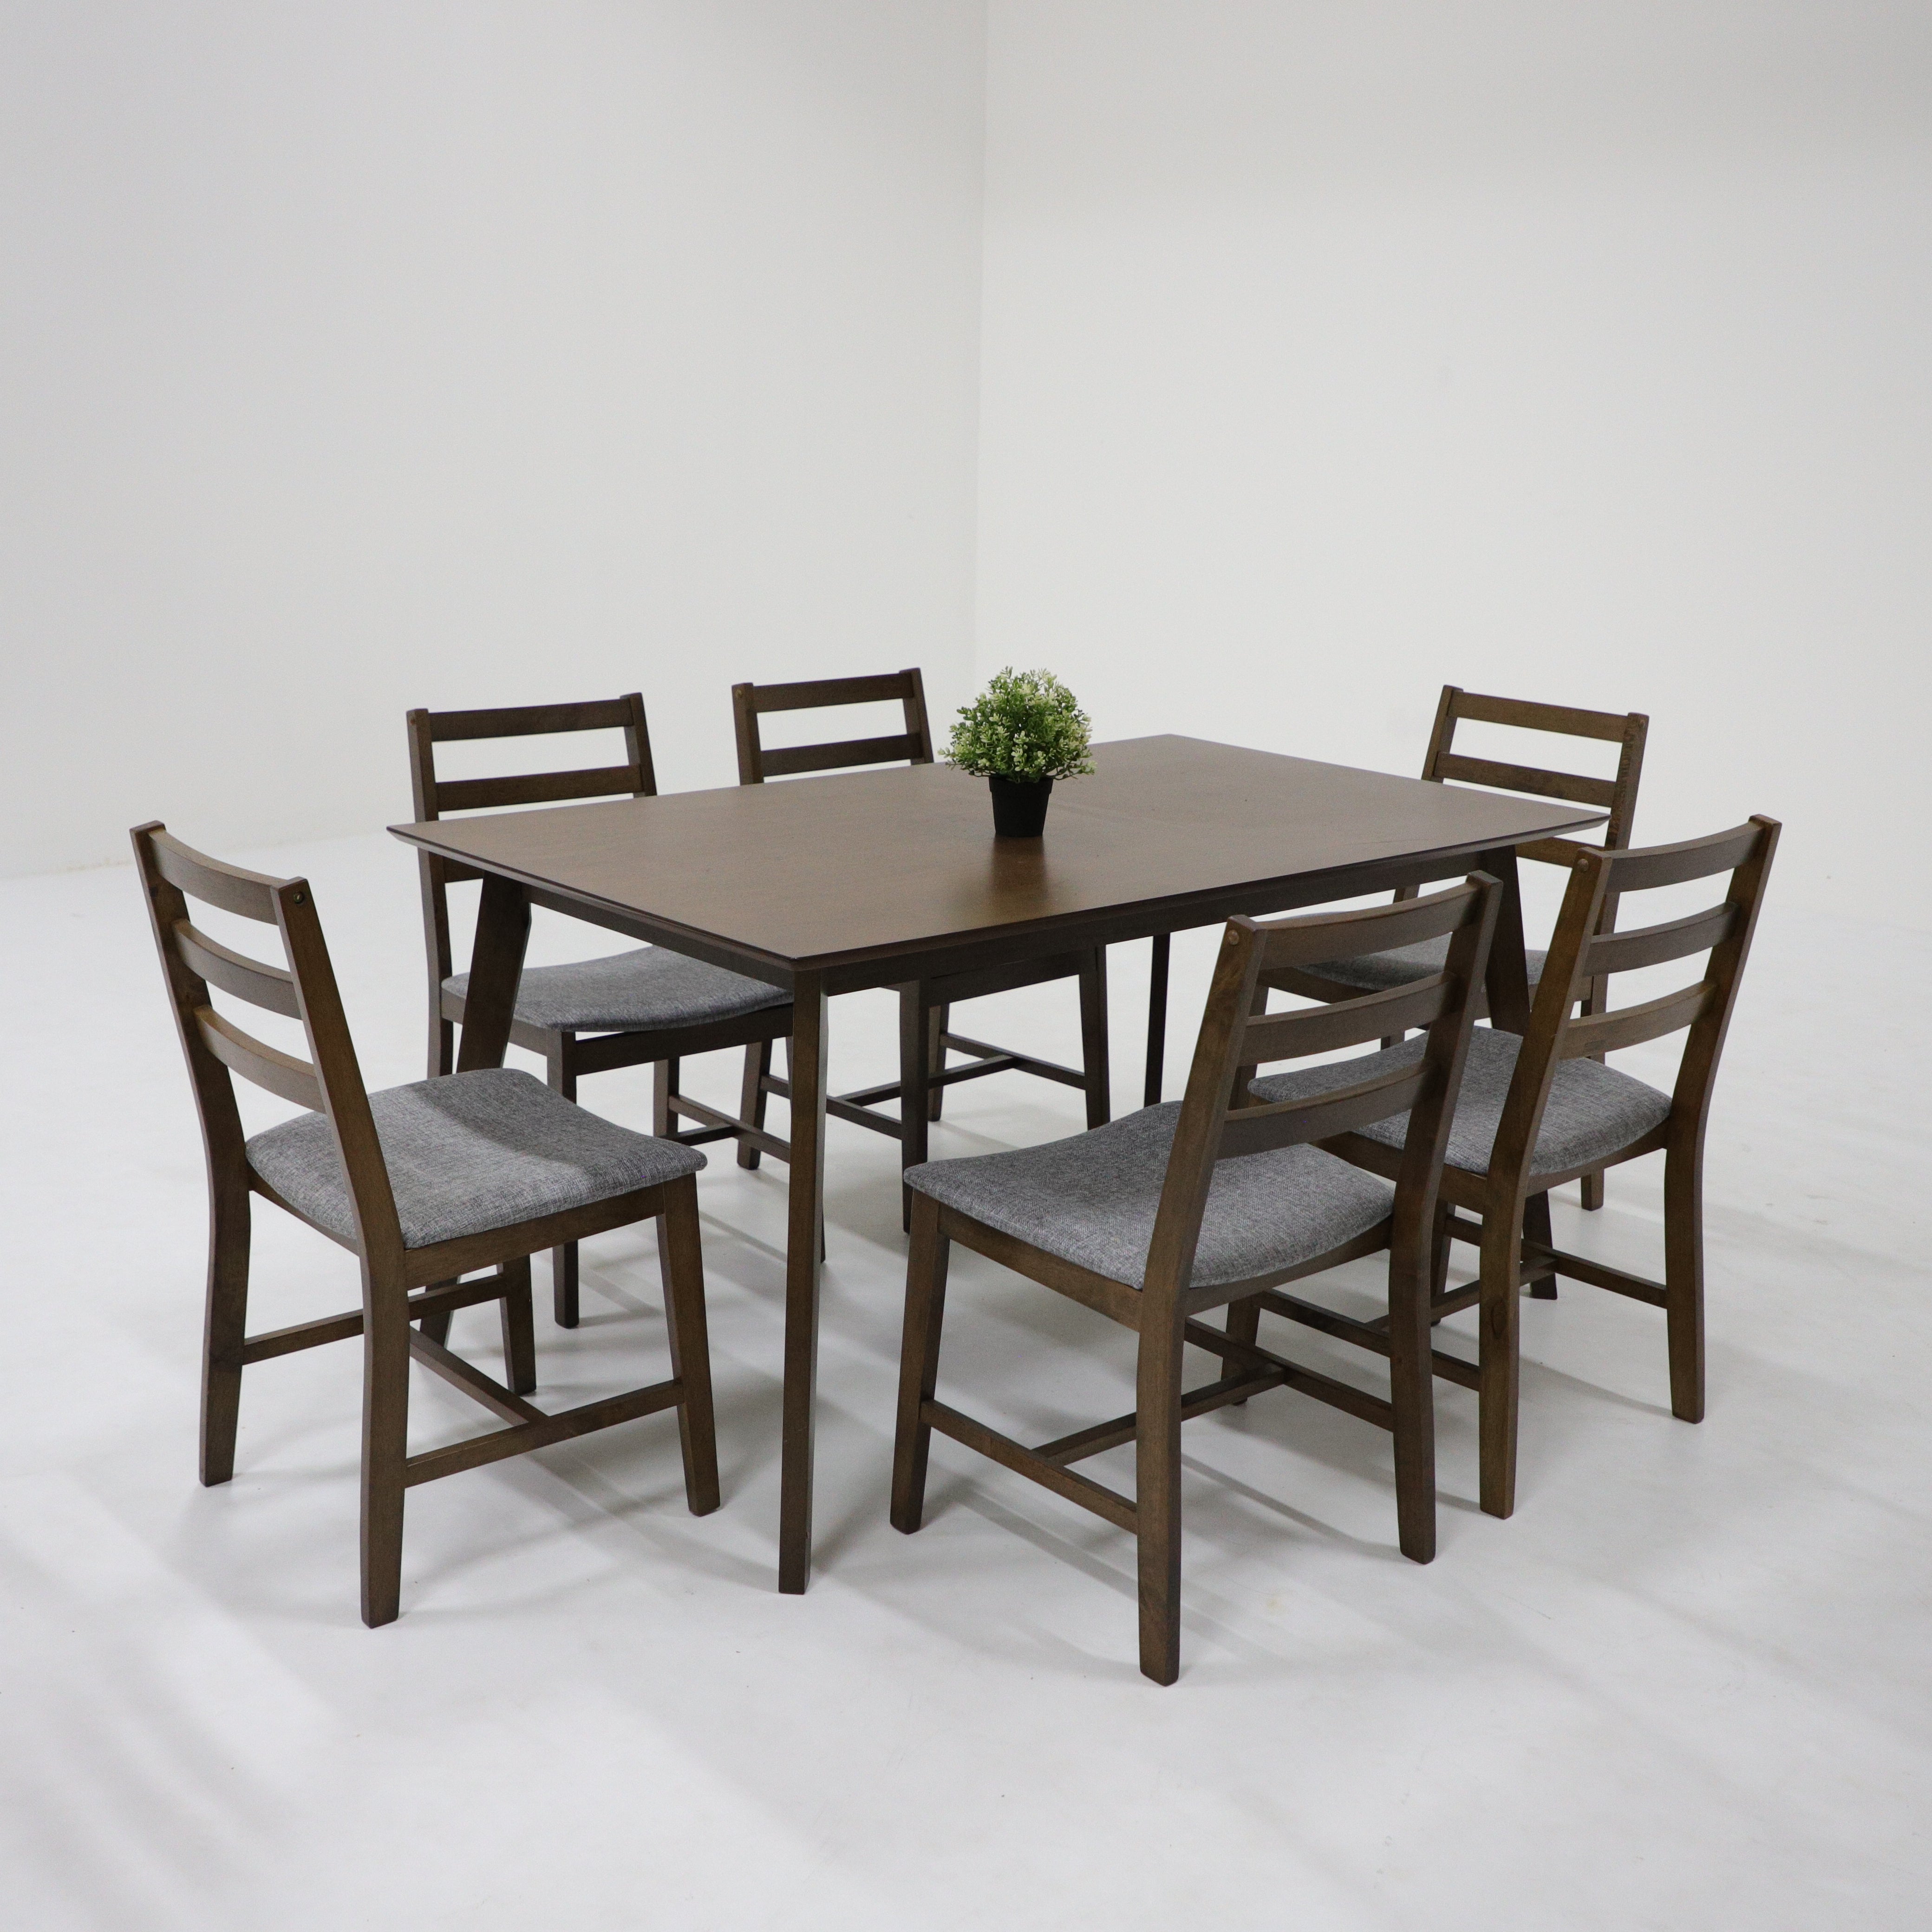 Anthem Dining Set (1 Table + 6 Chairs)